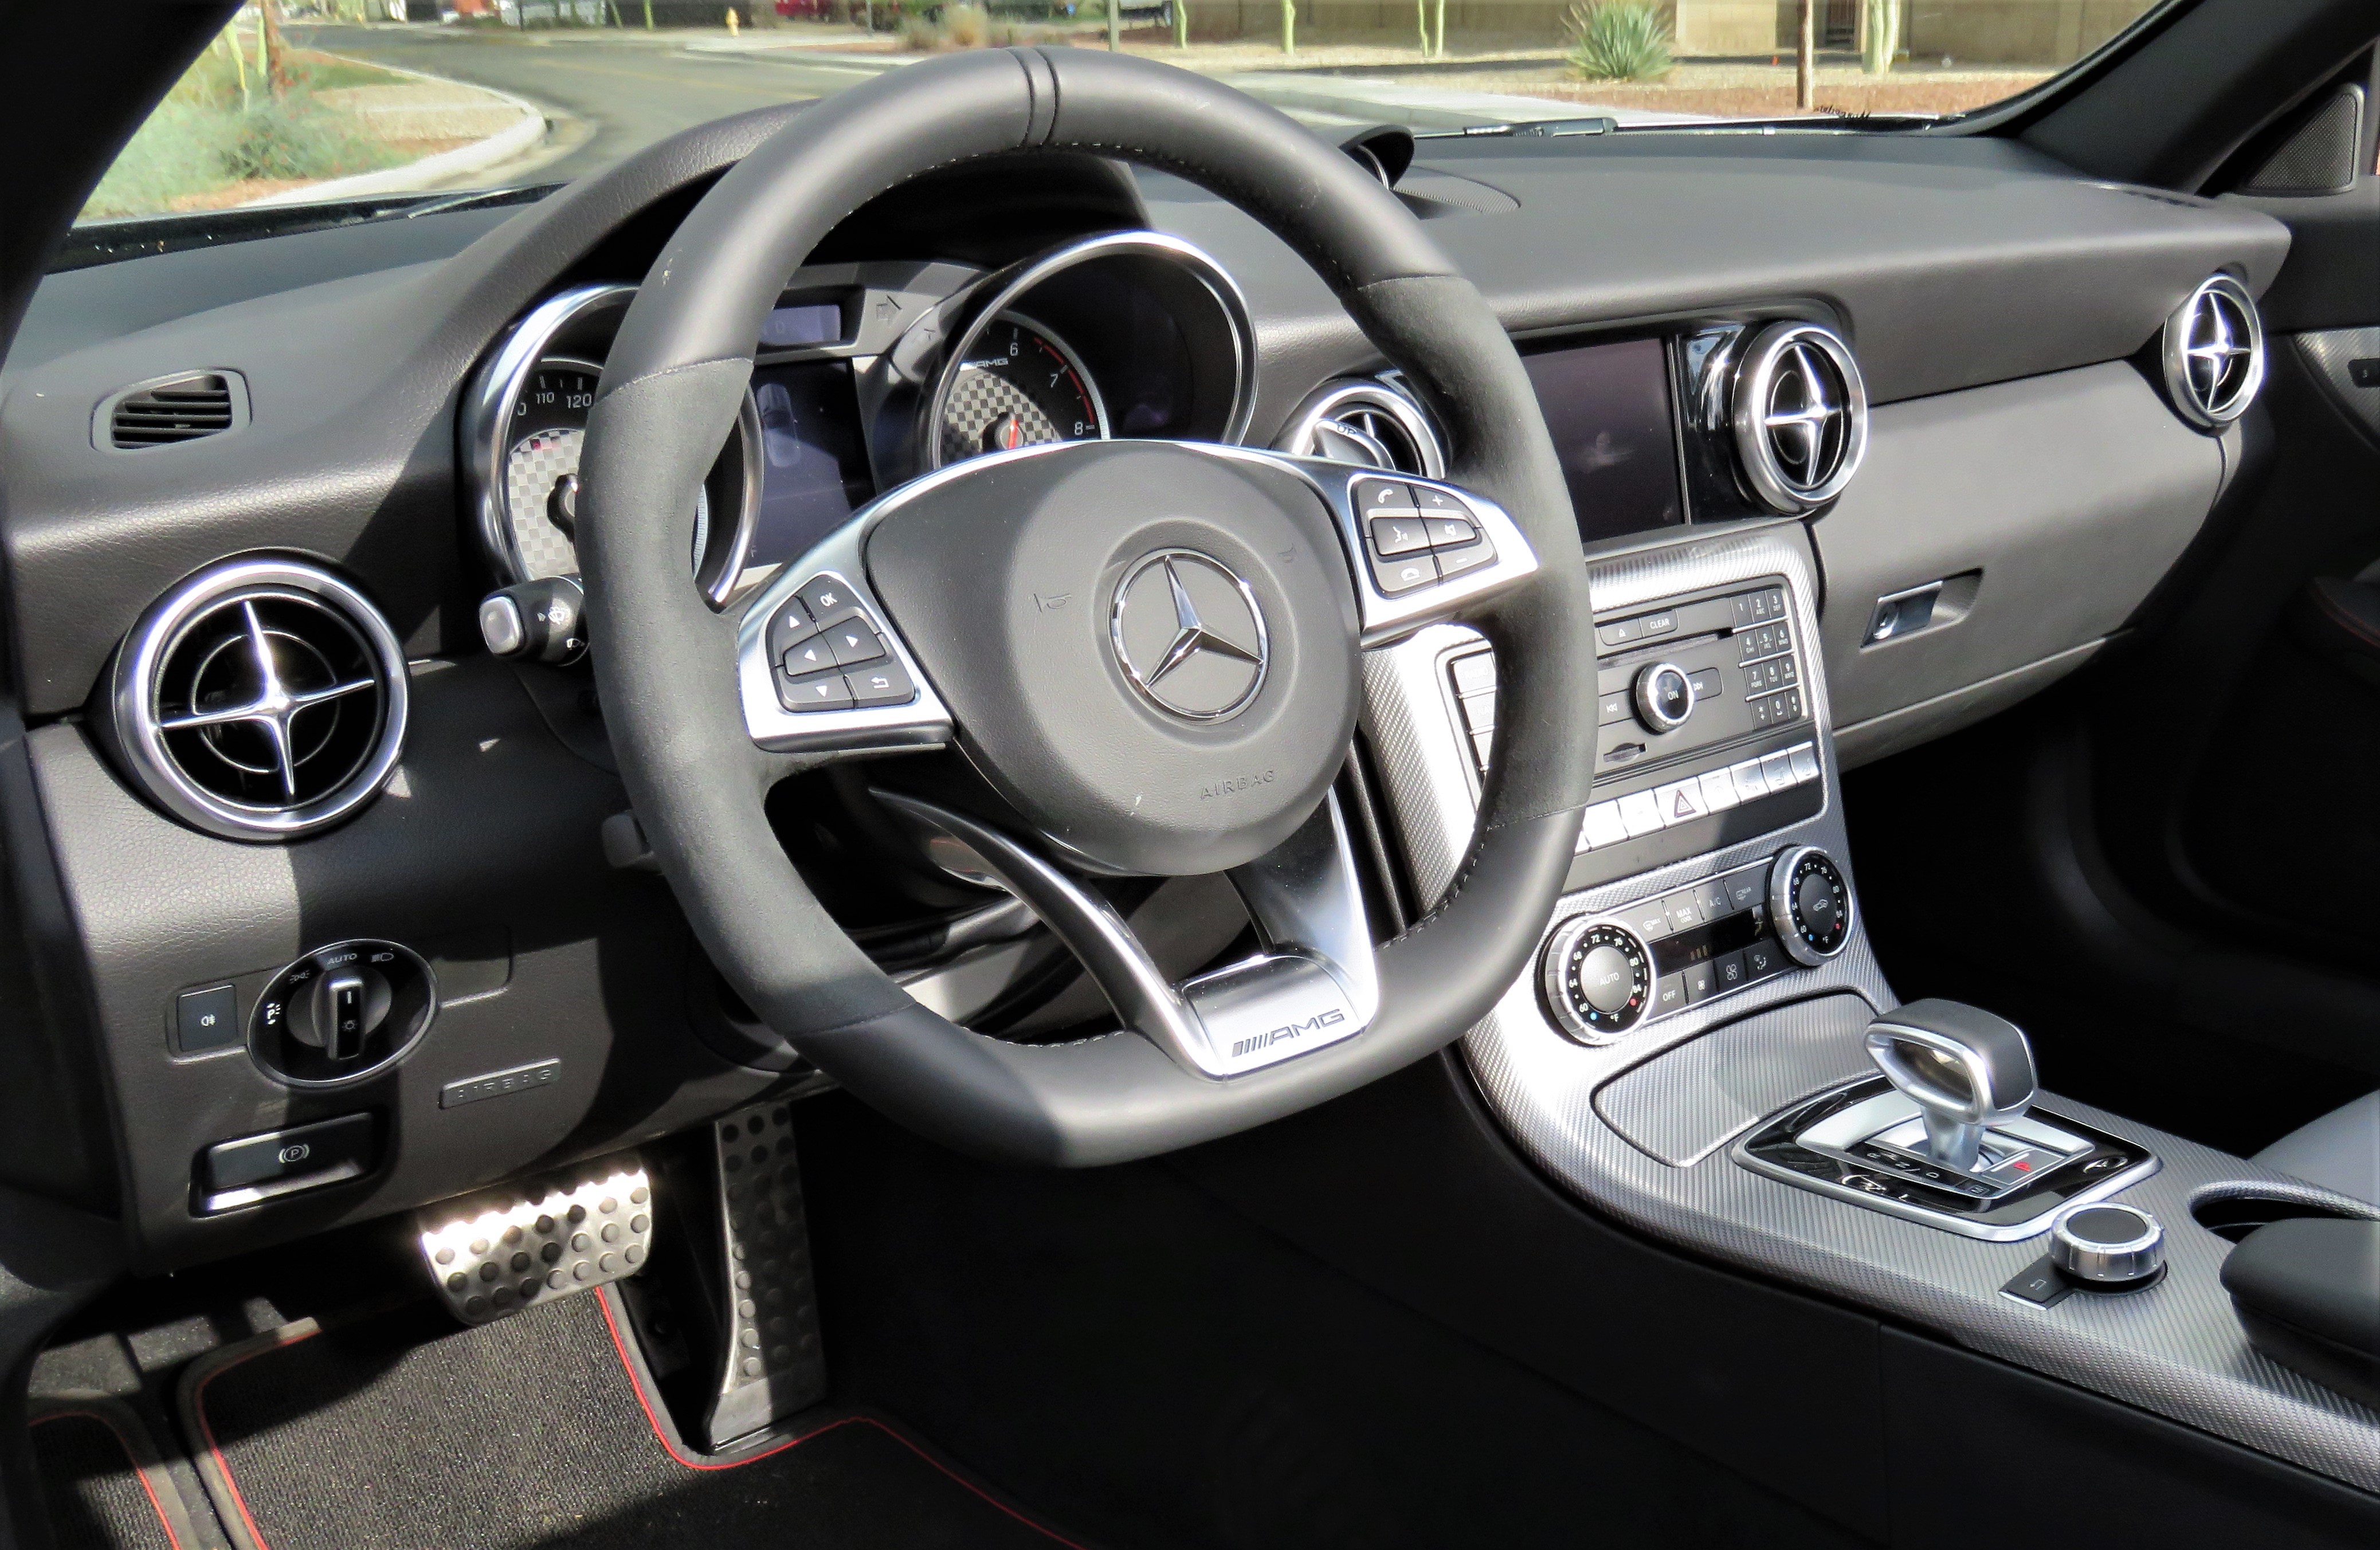 , AMG dials in new SLC43 roadster with turbo-V6 instead of V8 muscle, ClassicCars.com Journal